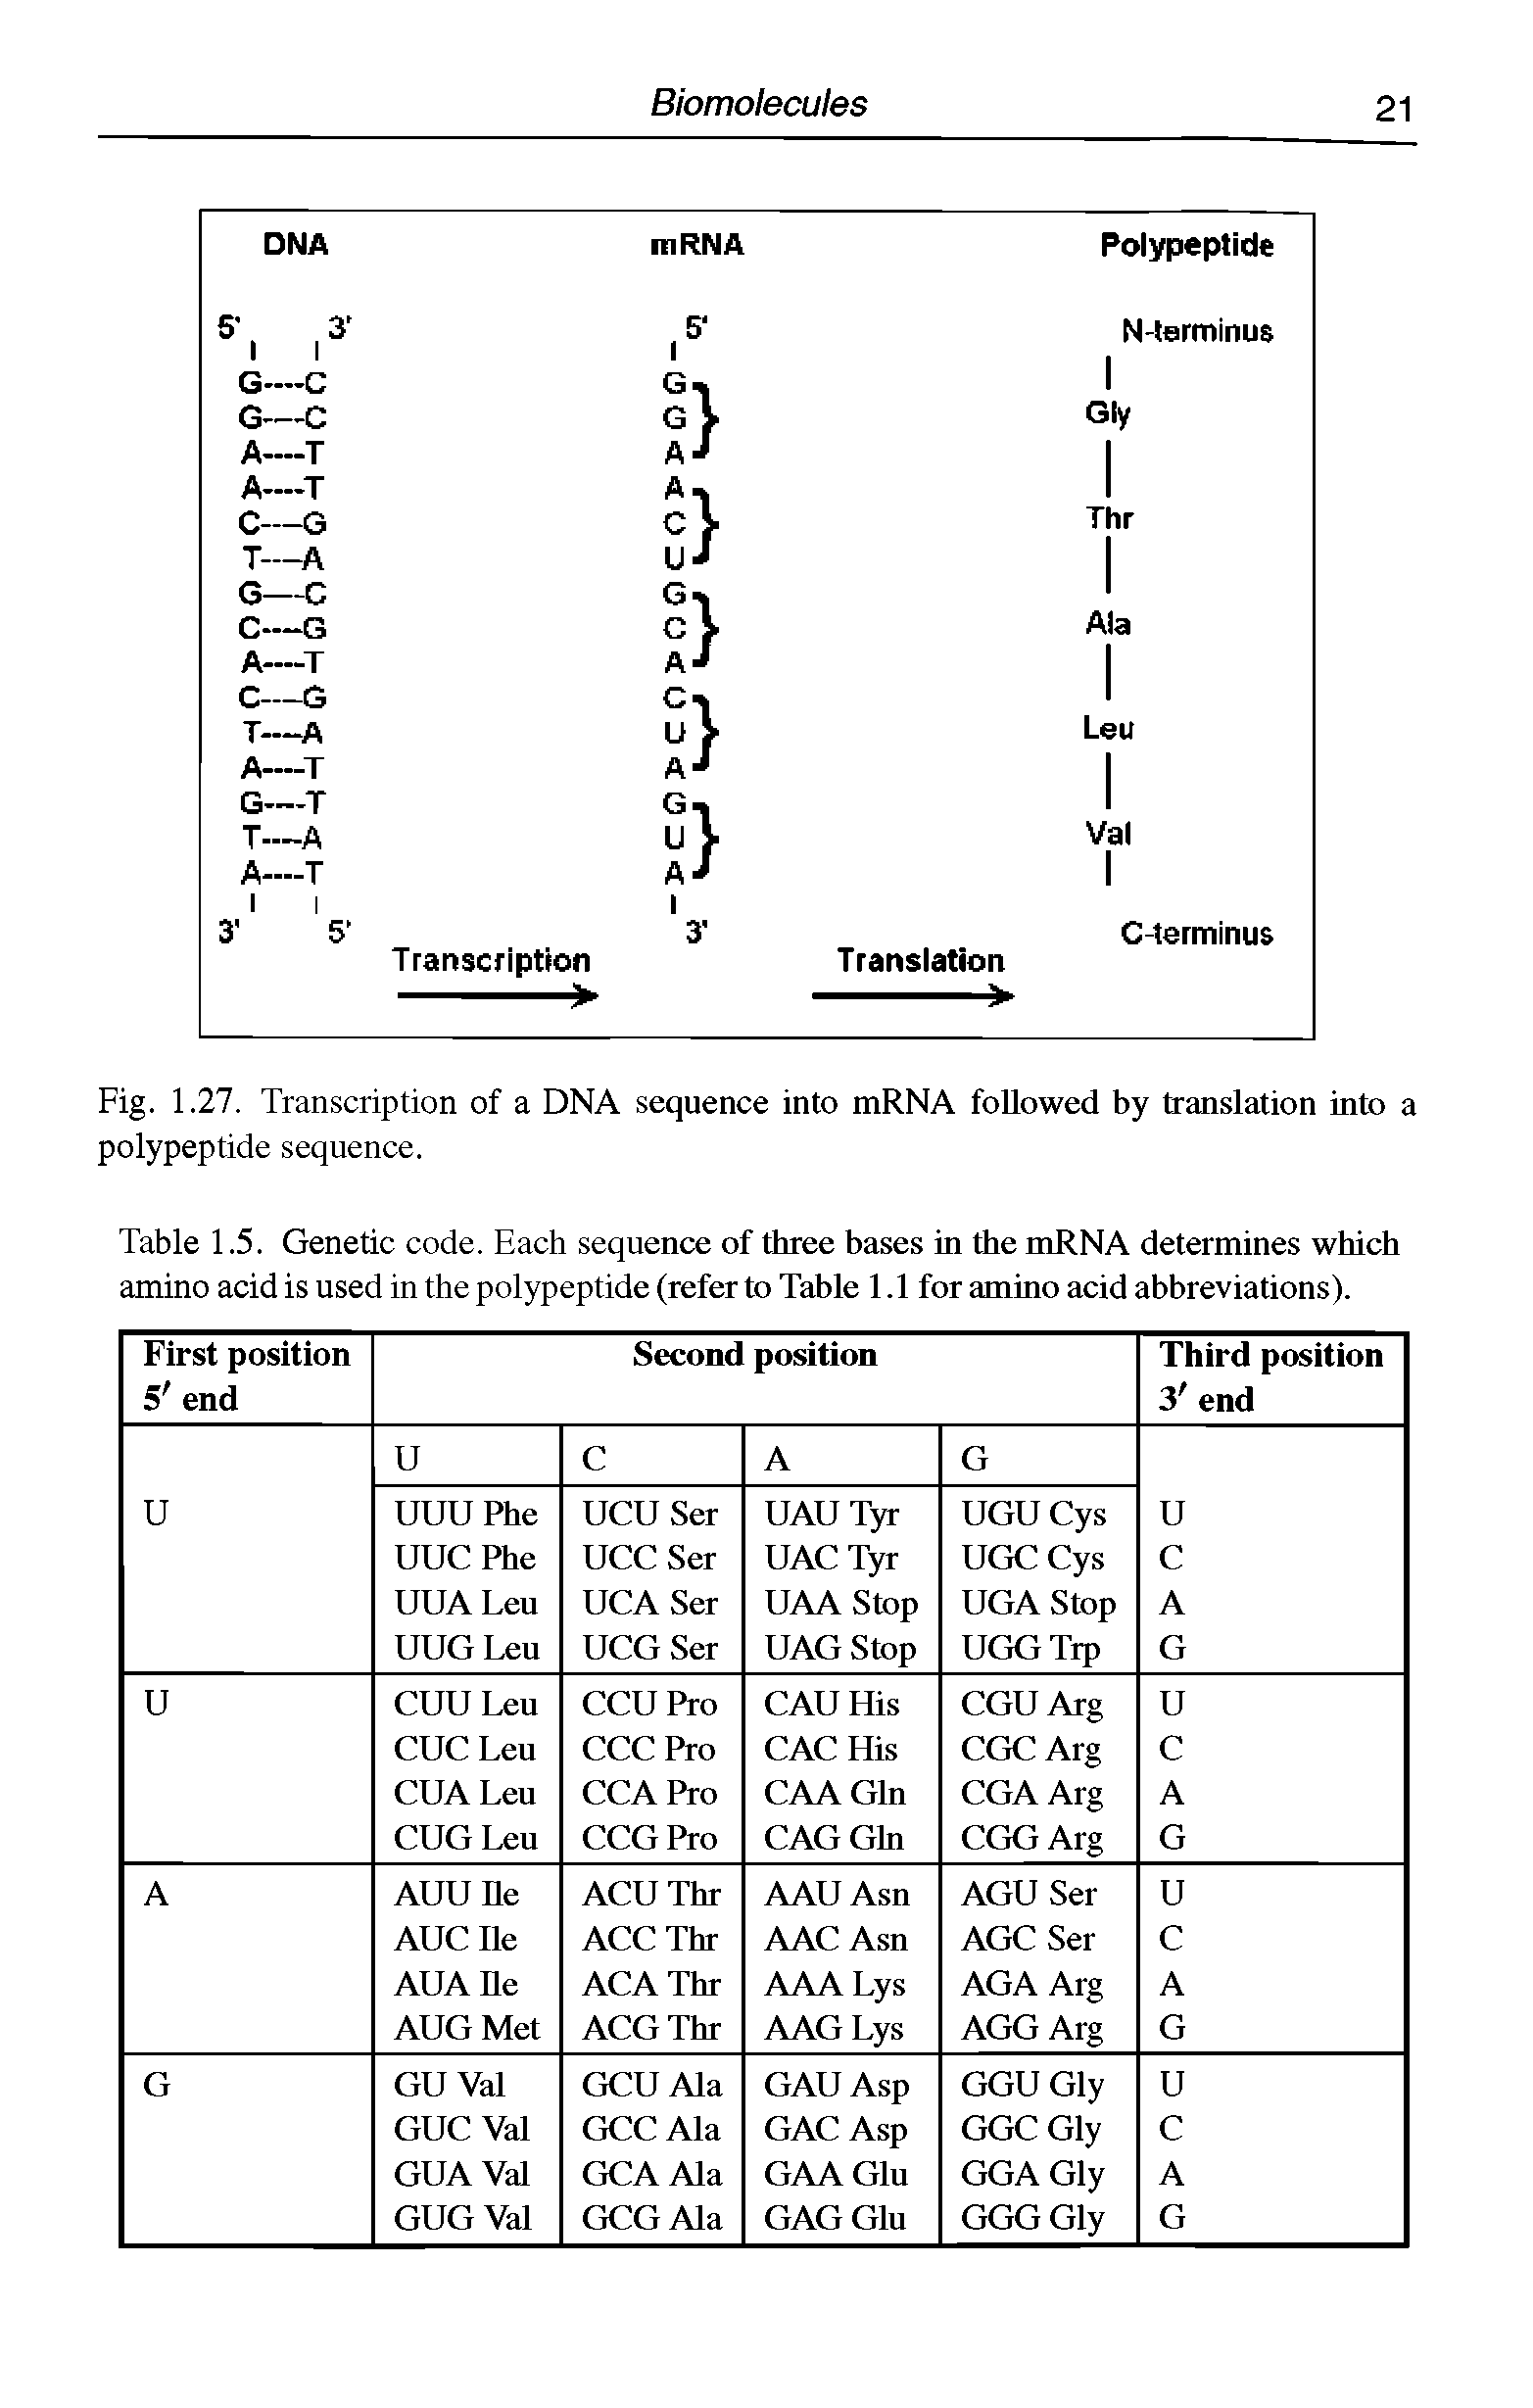 Table 1.5. Genetic code. Each sequence of three bases in the mRNA determines which amino acid is used in the polypeptide (refer to Table 1.1 for amino acid abbreviations).